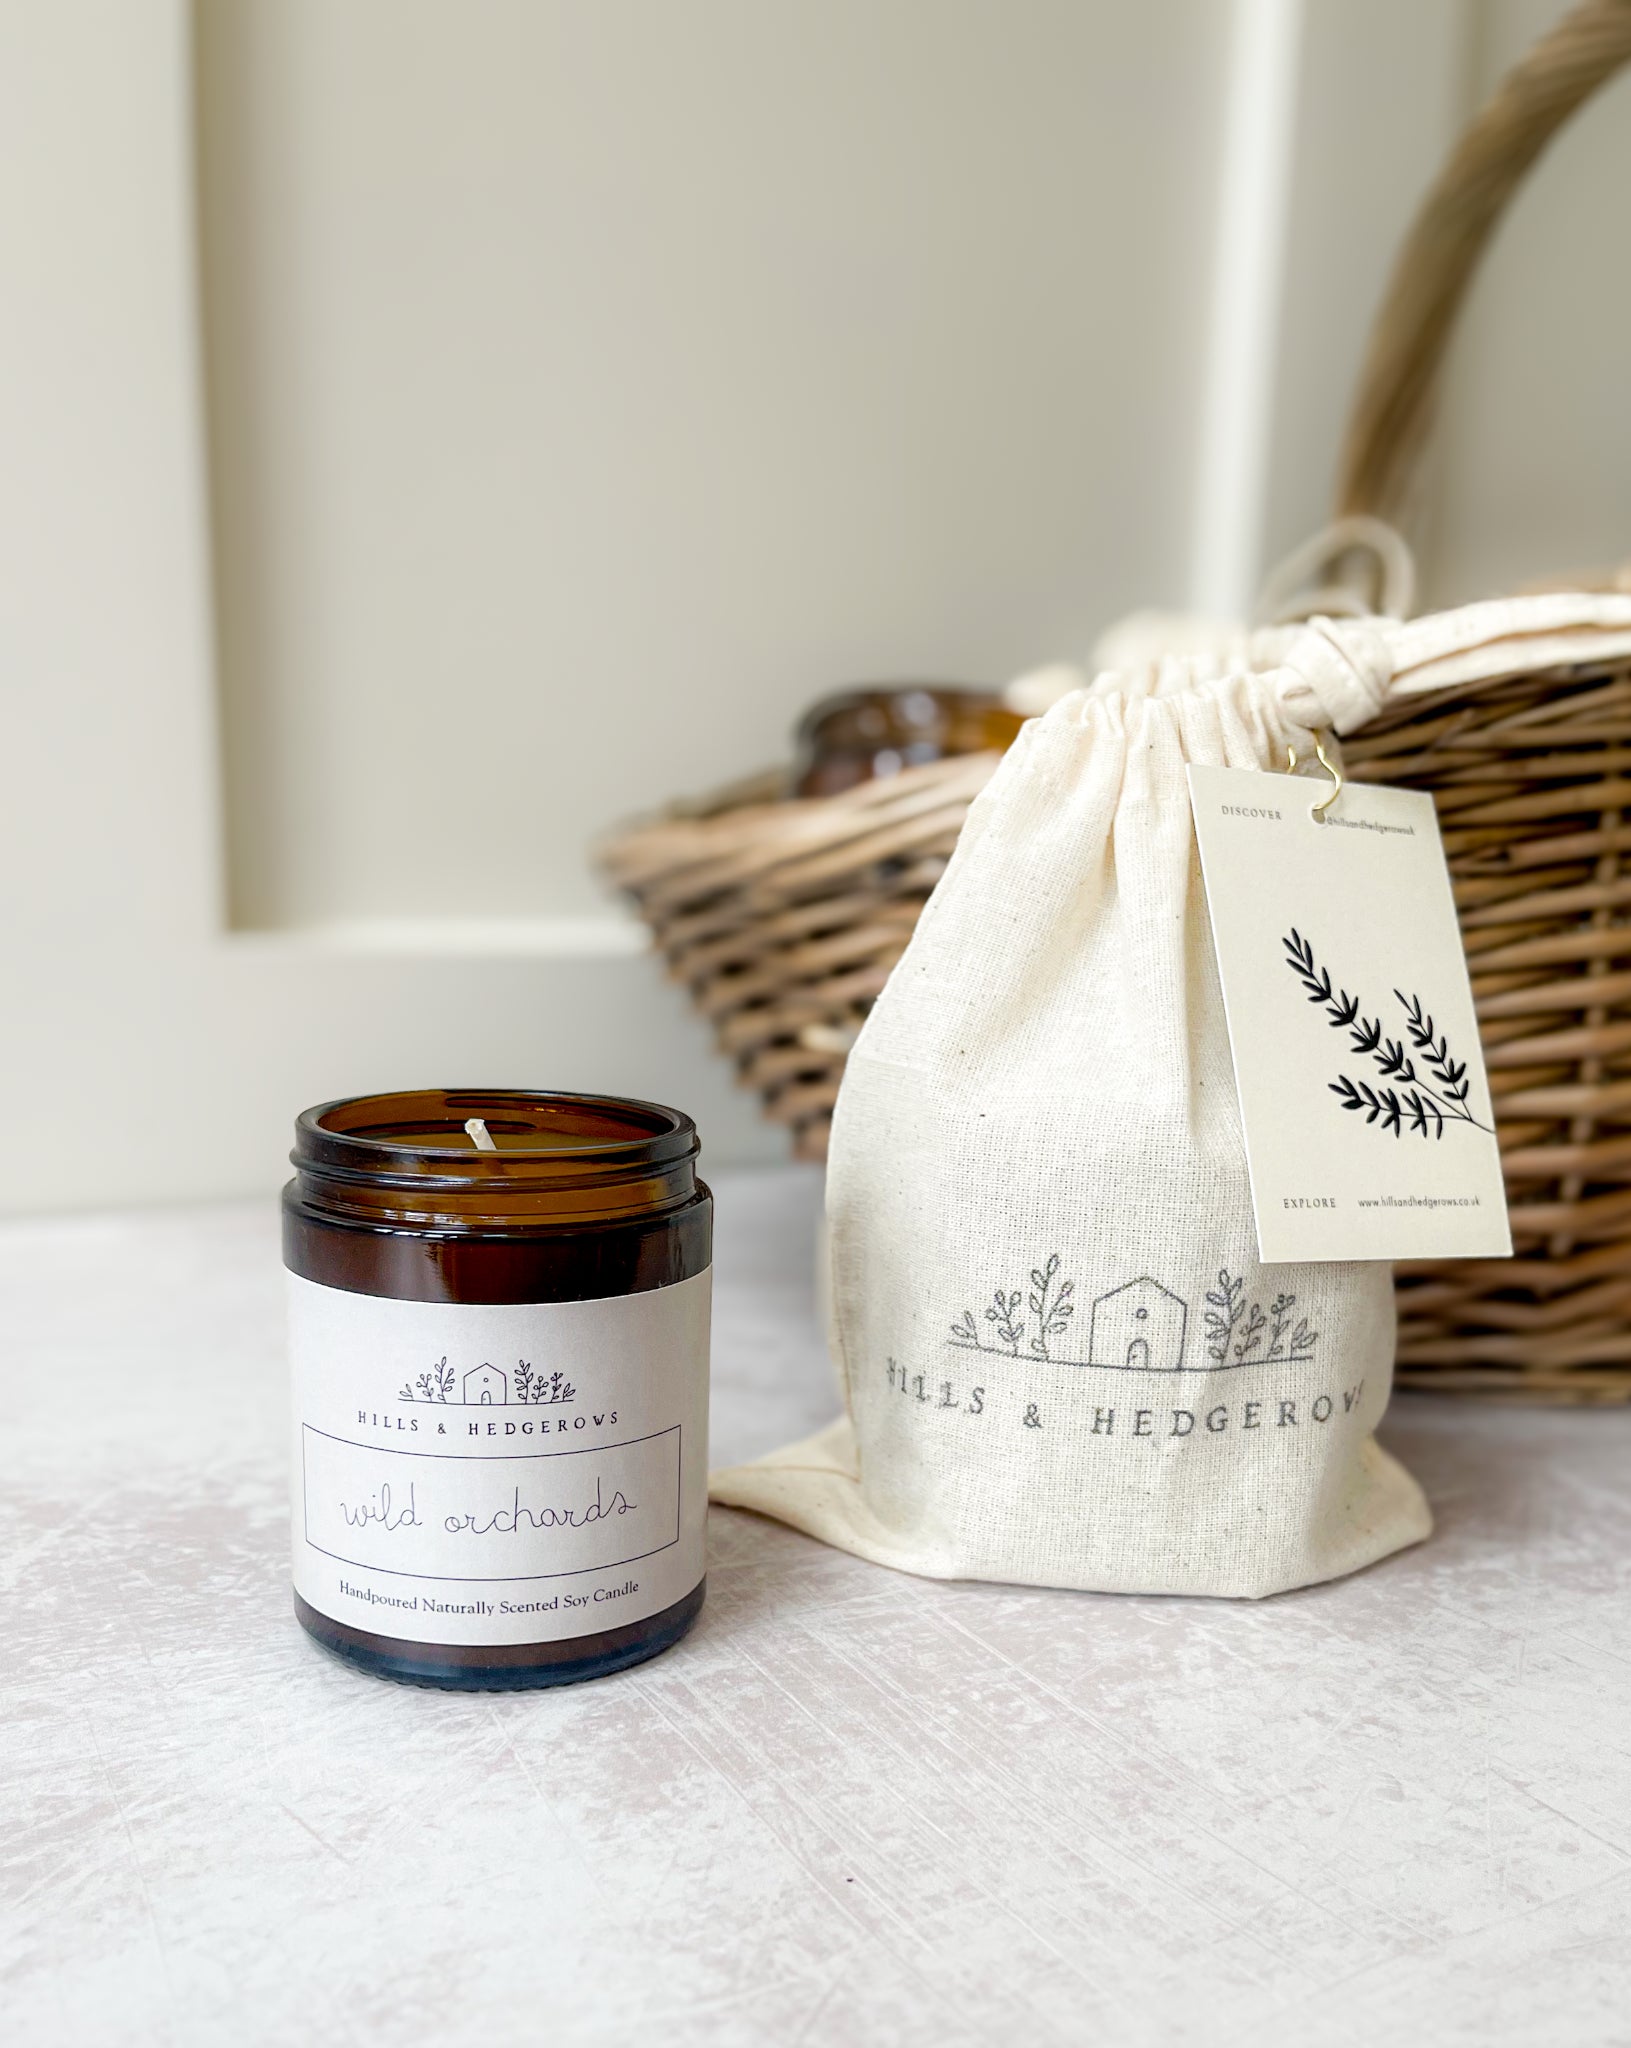 Wild Orchards natural soy wax candle, hand-poured sustainable luxury, perfect for relaxation and rejuvenation. In amber class jar with neutral label comes in cotton drawstring gift pouch.